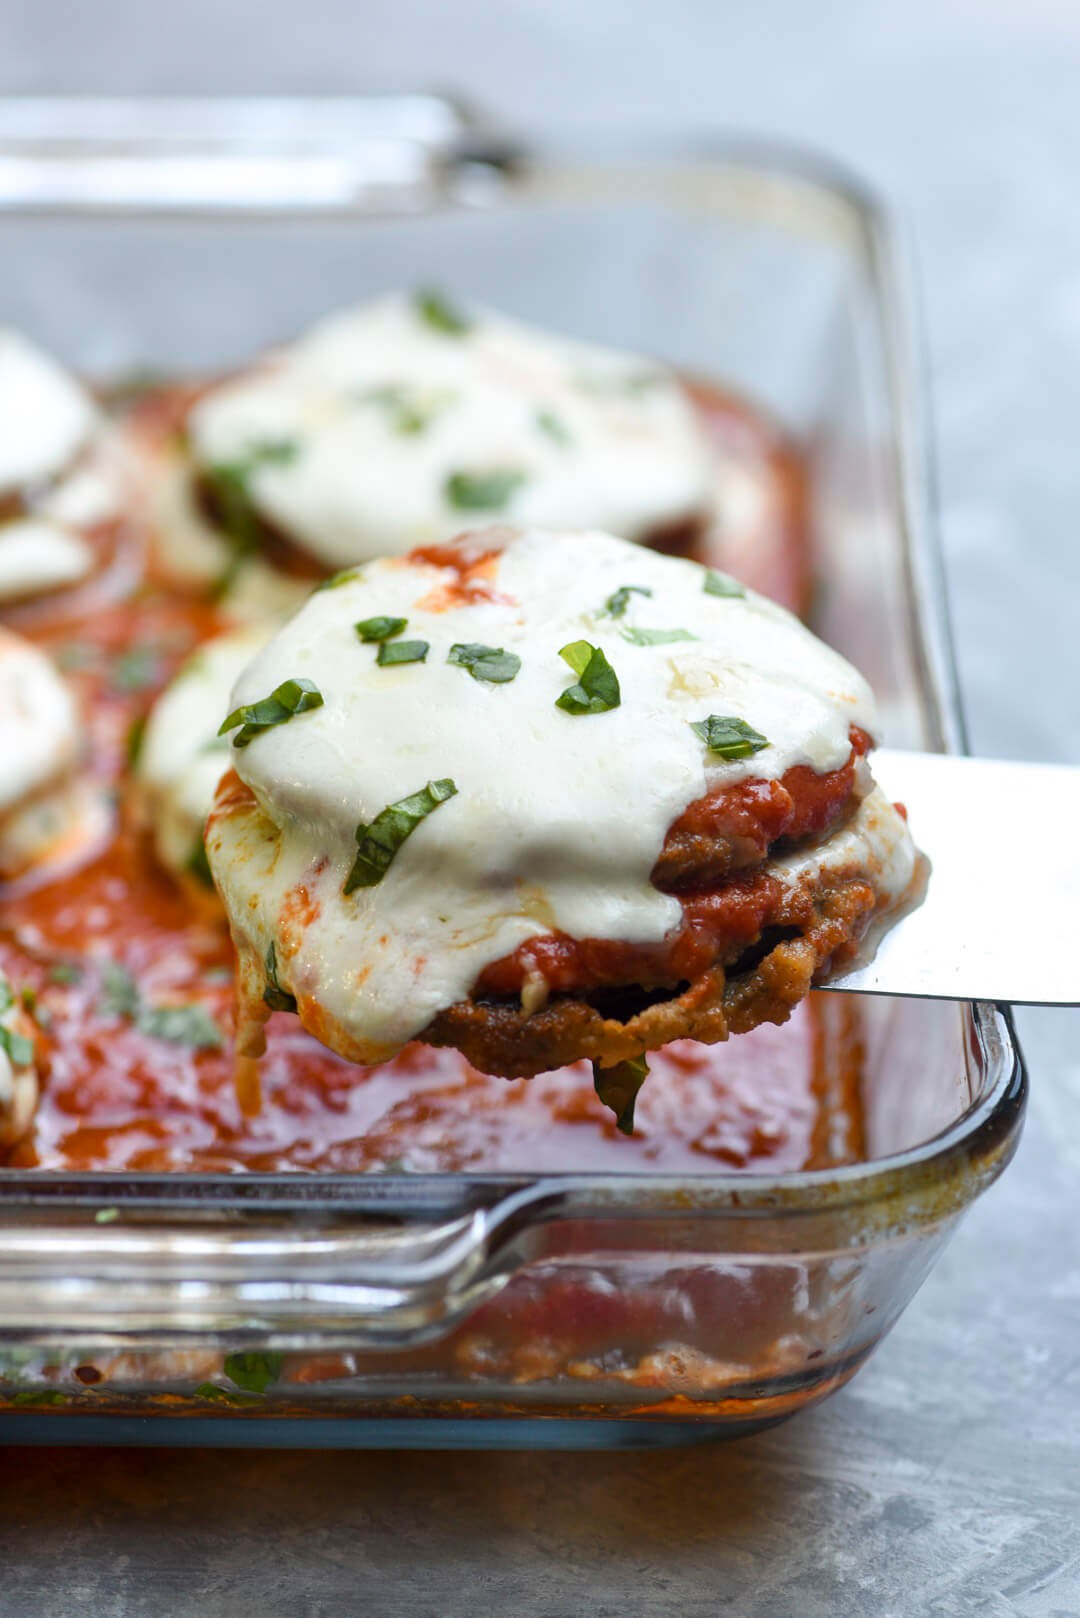 Baked Eggplant Parmesan Recipe (And Video!) | Cooknchic | Copy Me That